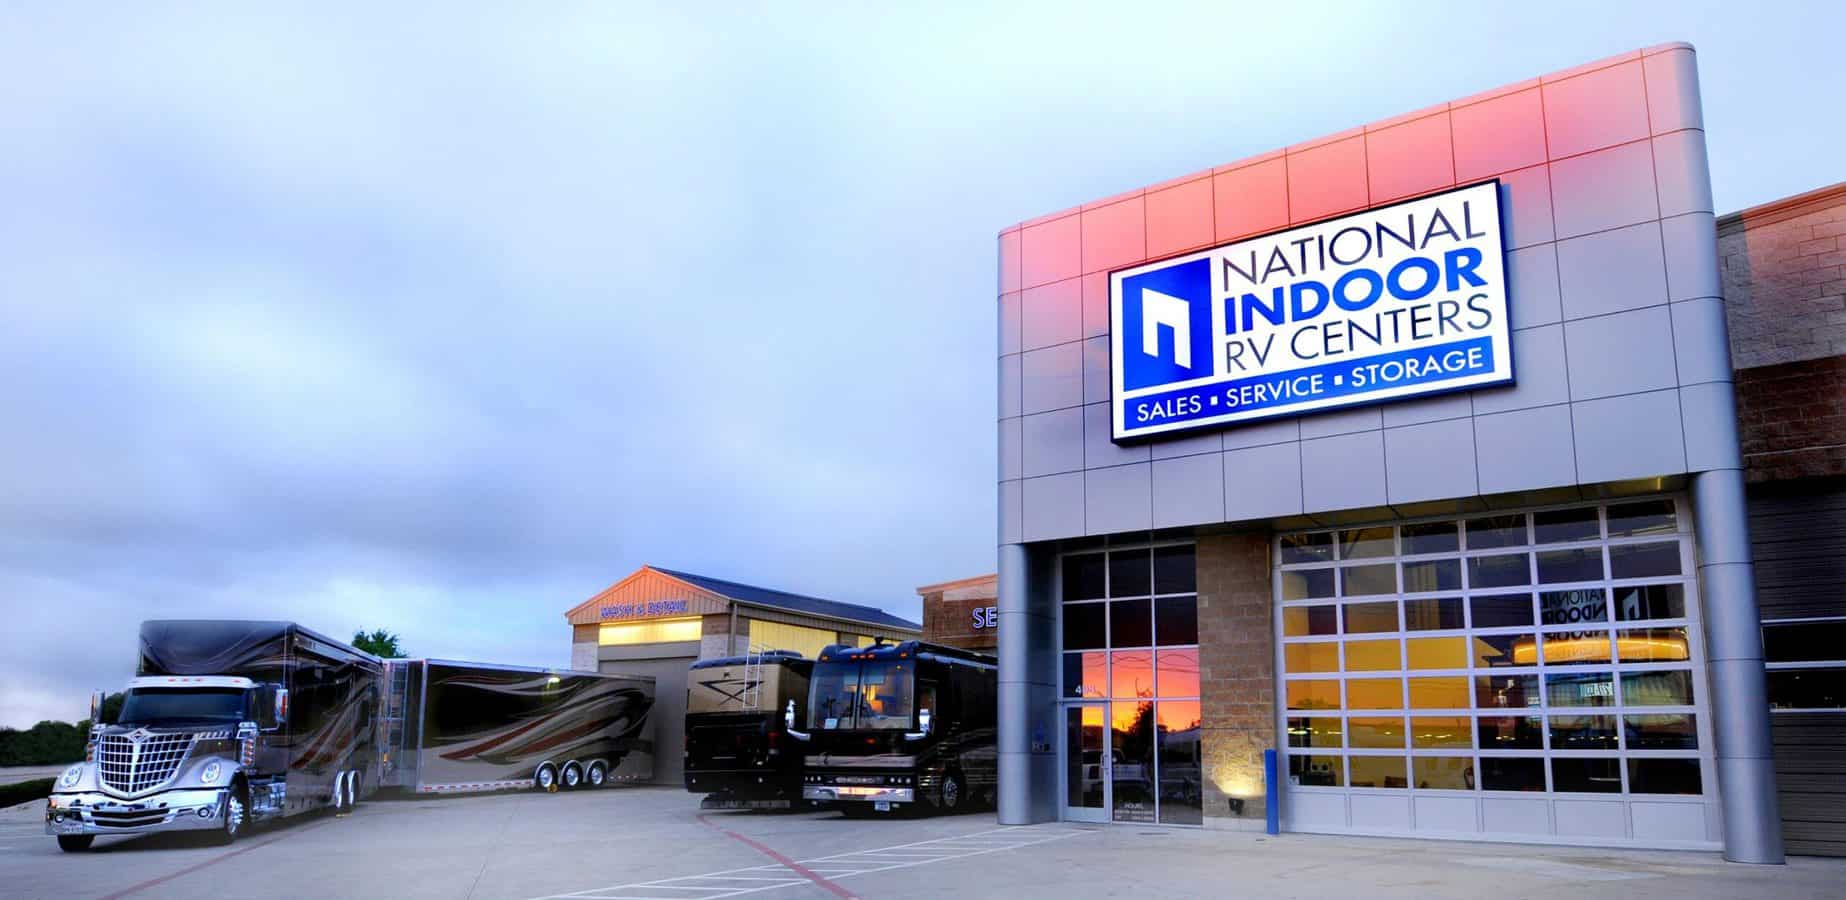 Exterior view of national indoor rv center